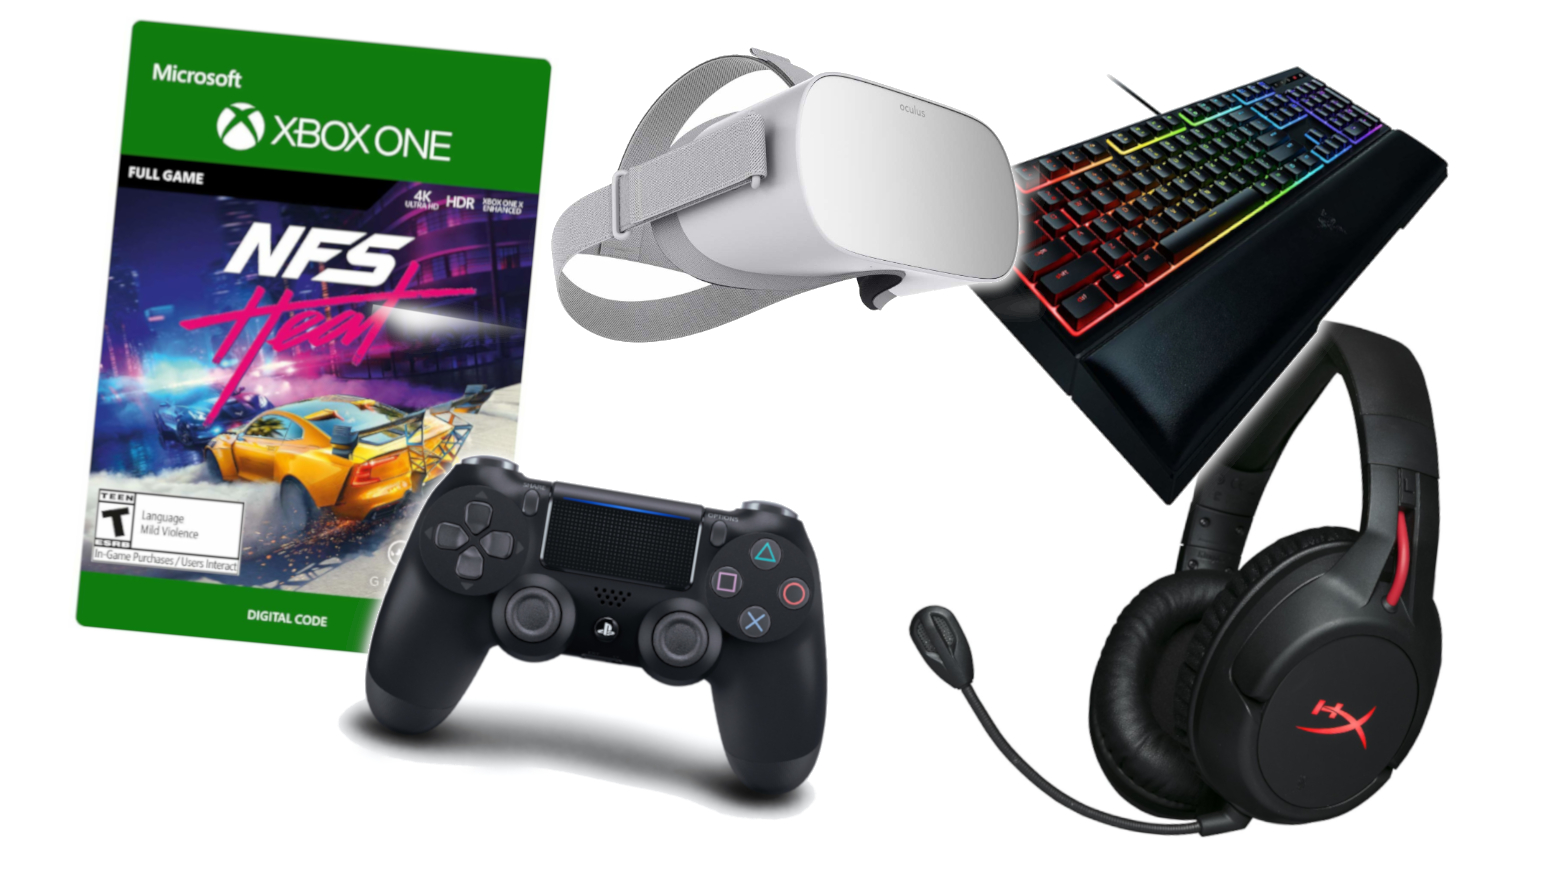 12 Best Cyber Monday Gaming Deals on Amazon (2019) | Heavy.com